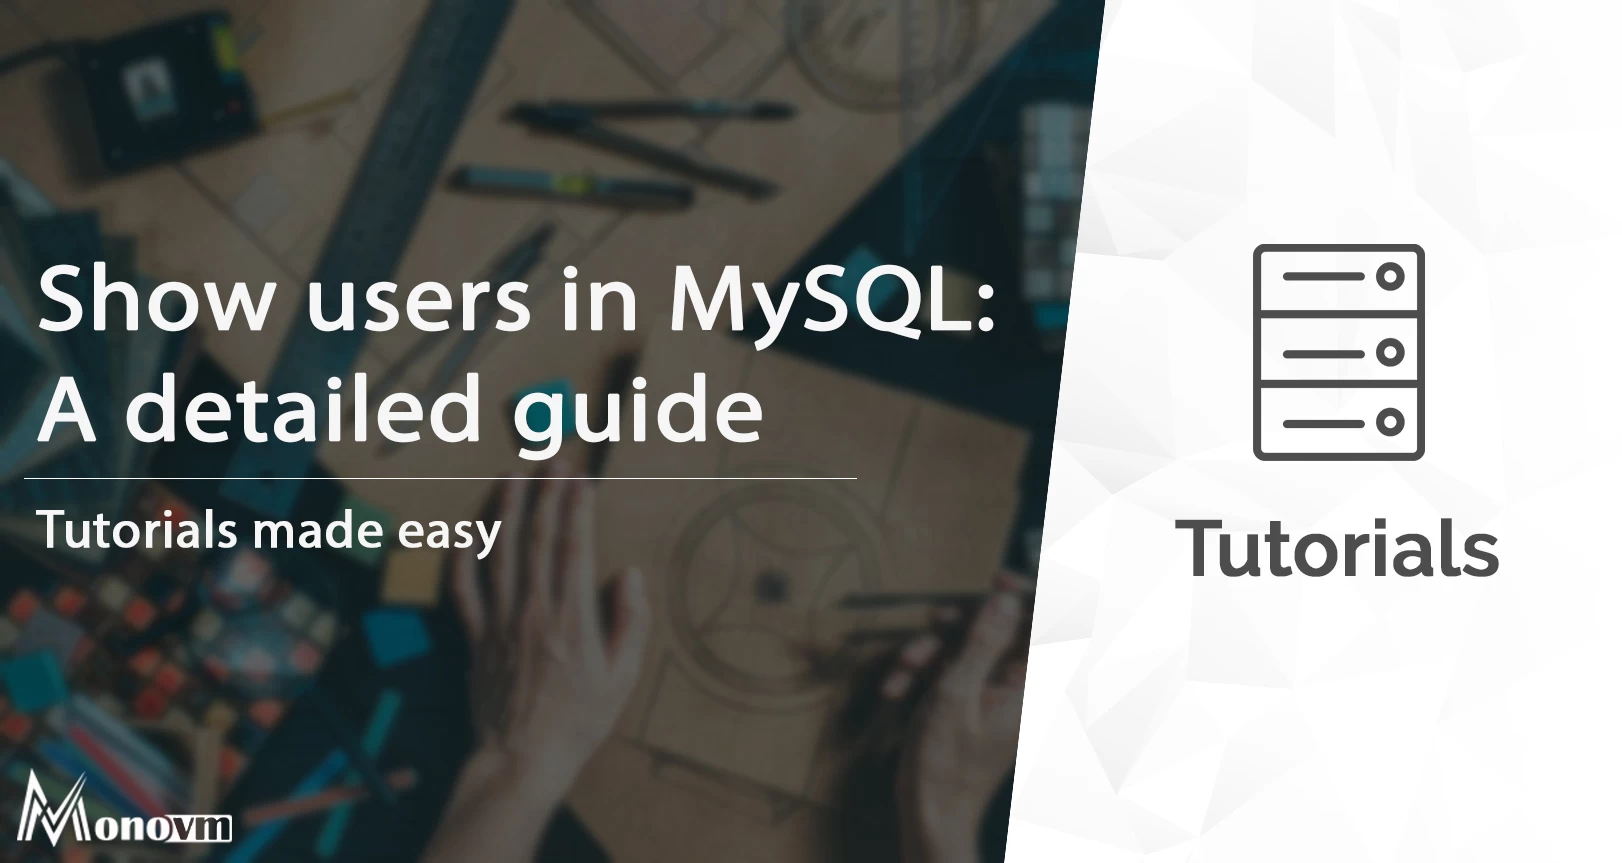 How to show users in MySQL?